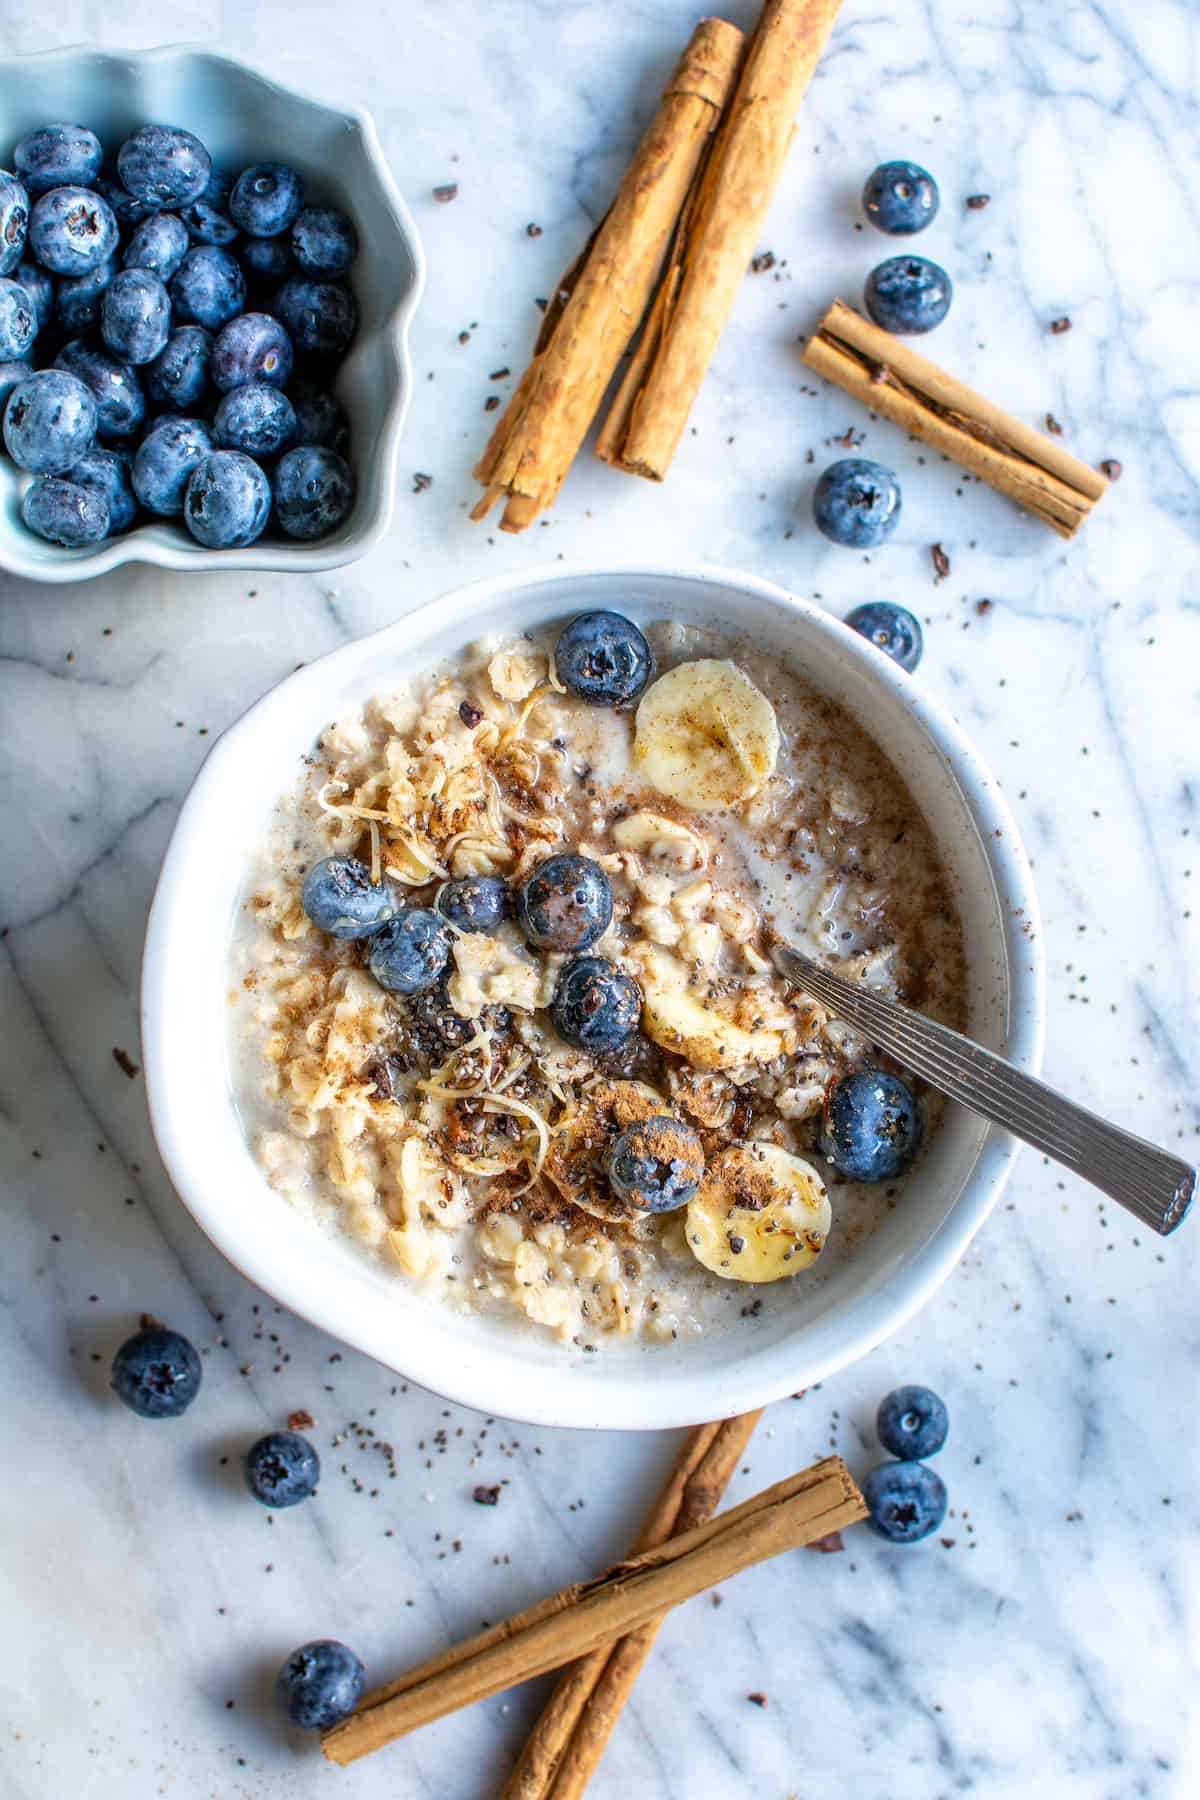 Mexican avena in a white bowl with cinnamon sticks and blueberries